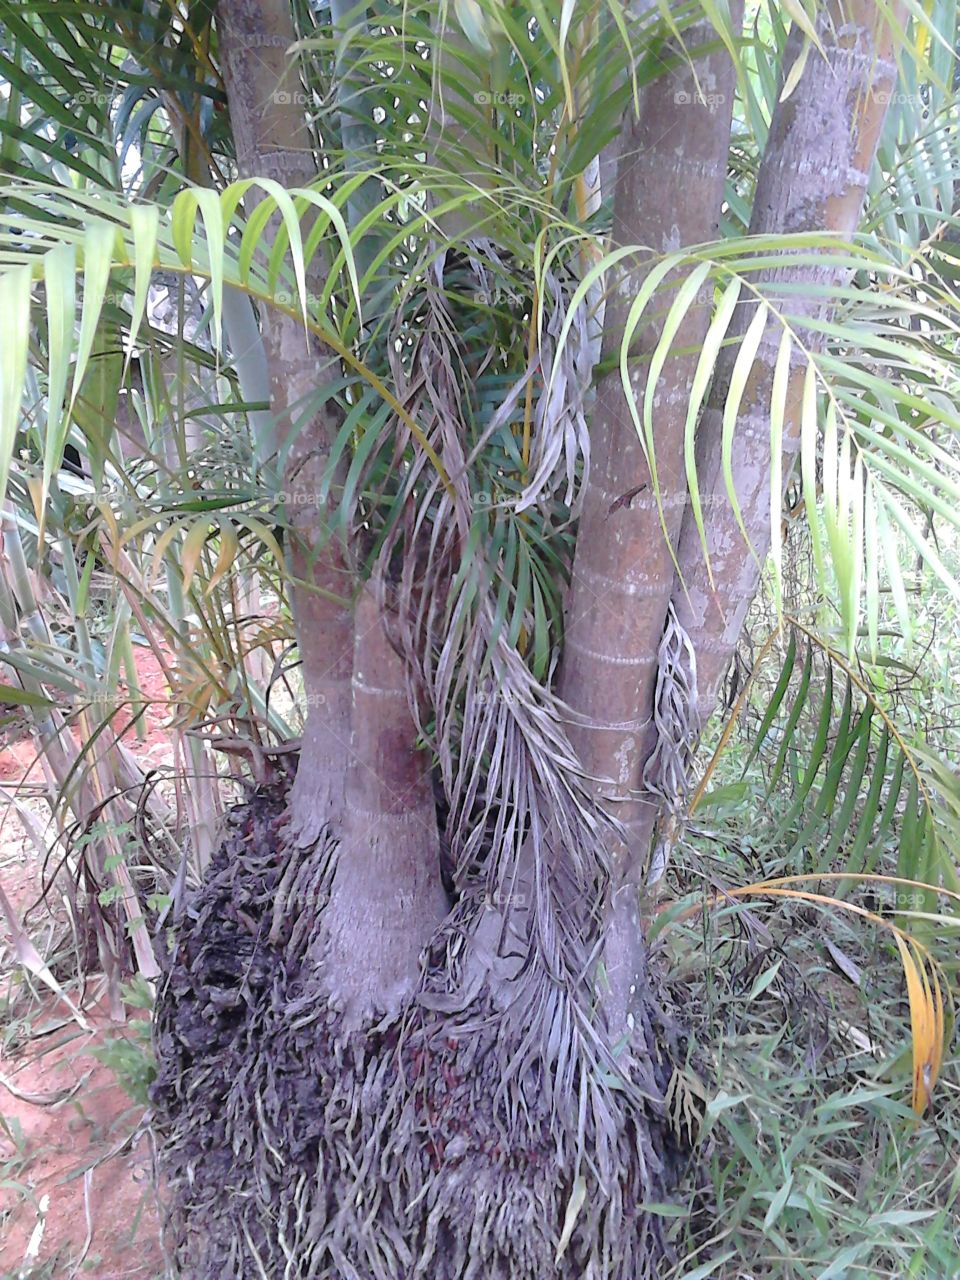 Roots of palm trees